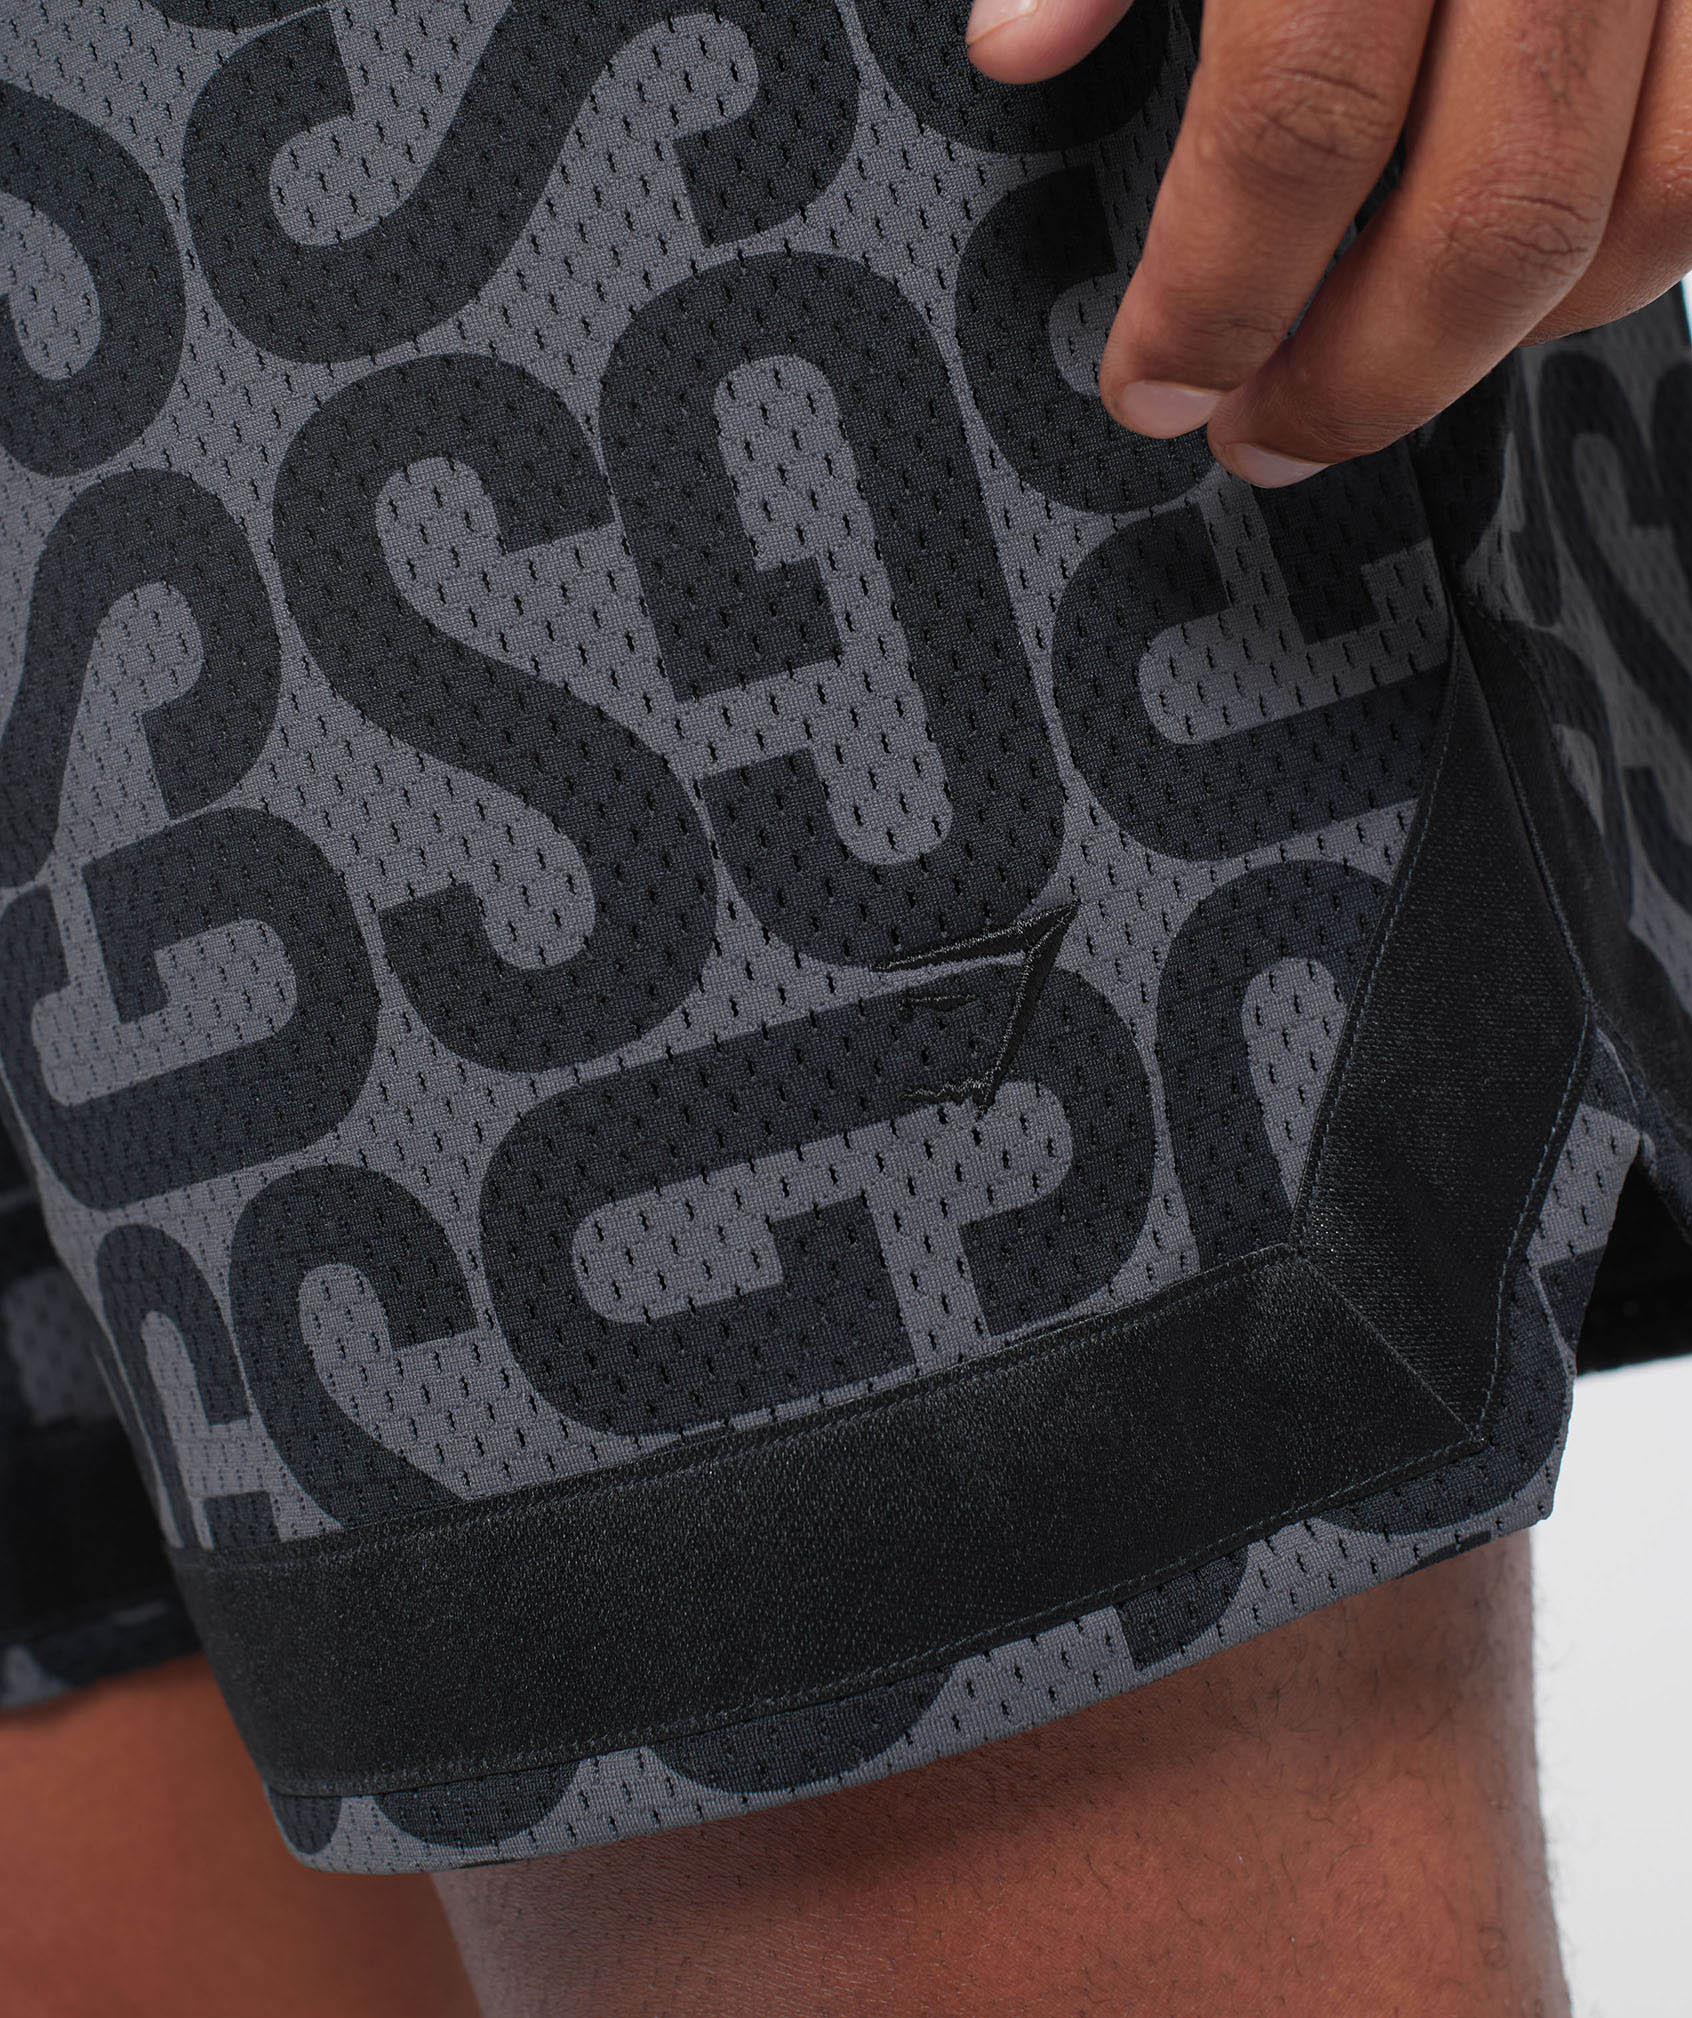 Rest Day Shorts in Black/Onyx Grey - view 5